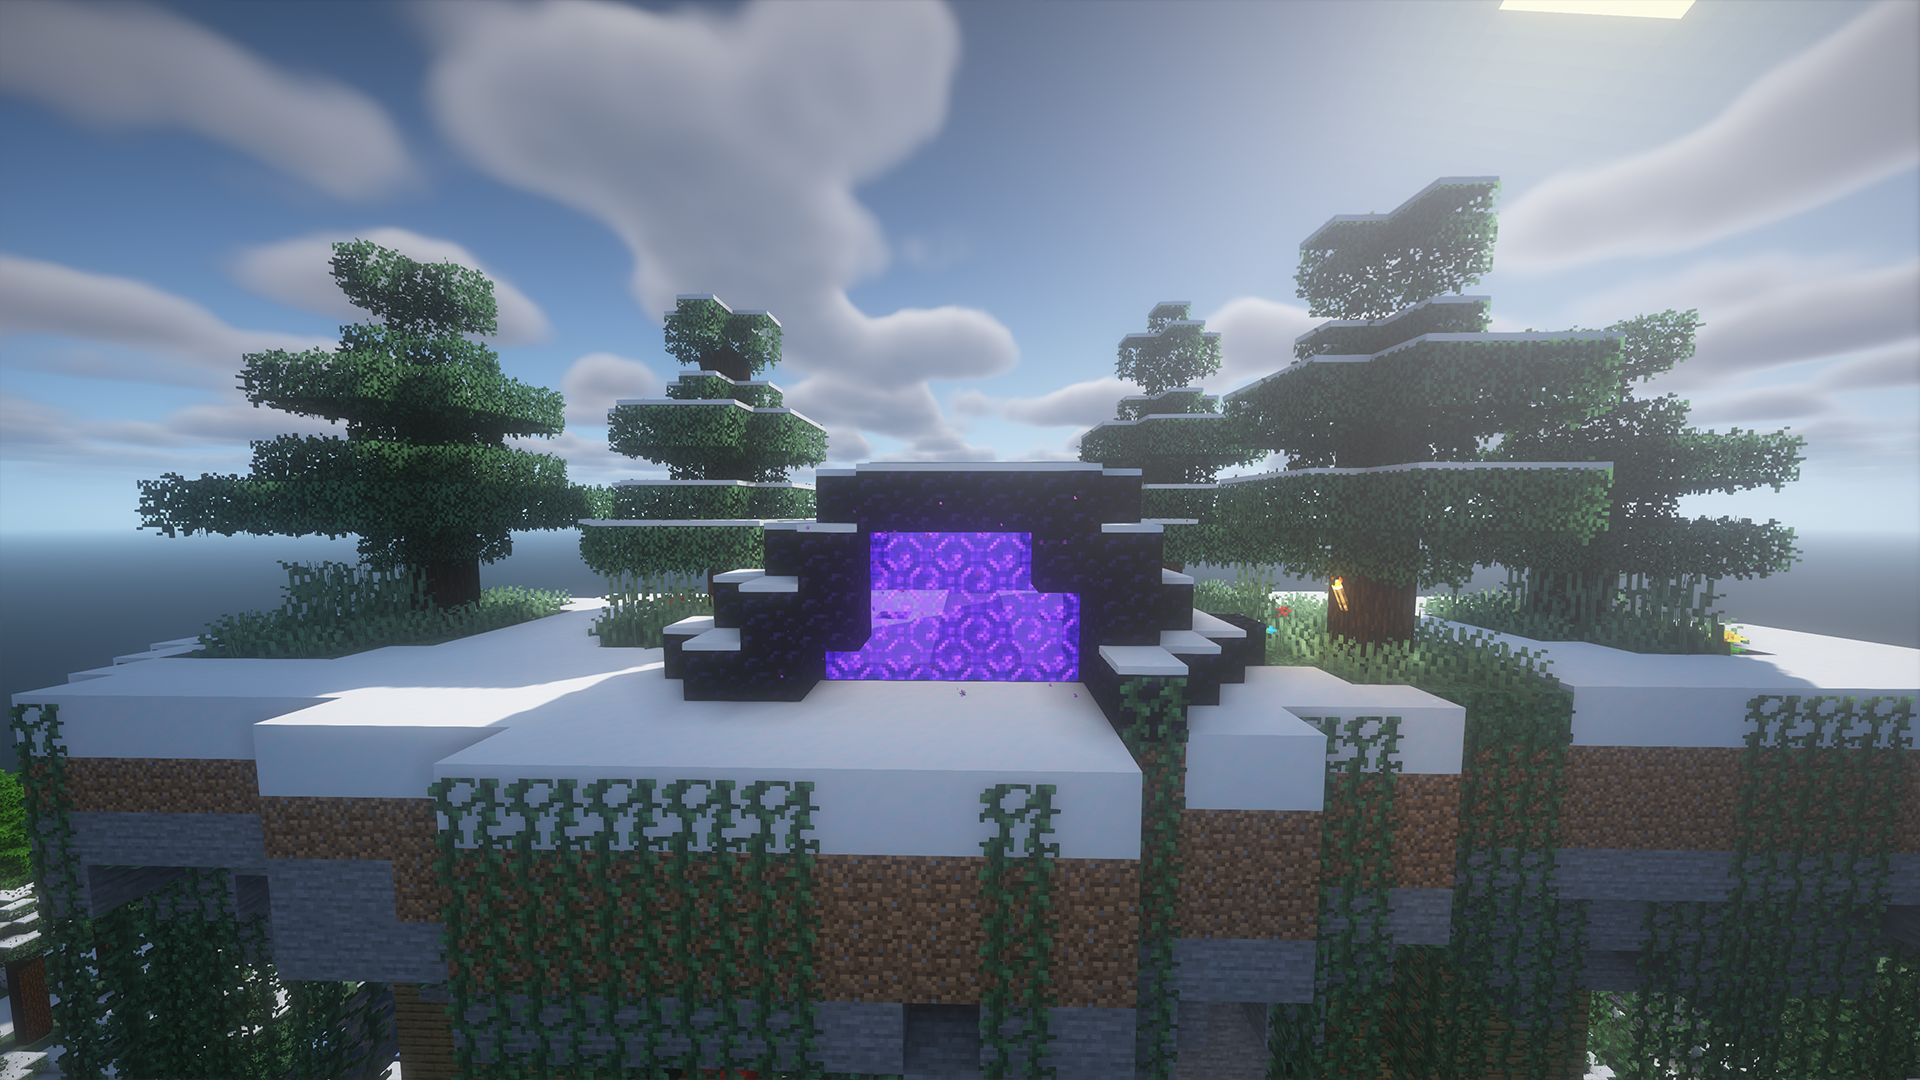 A nether portal view with shaders